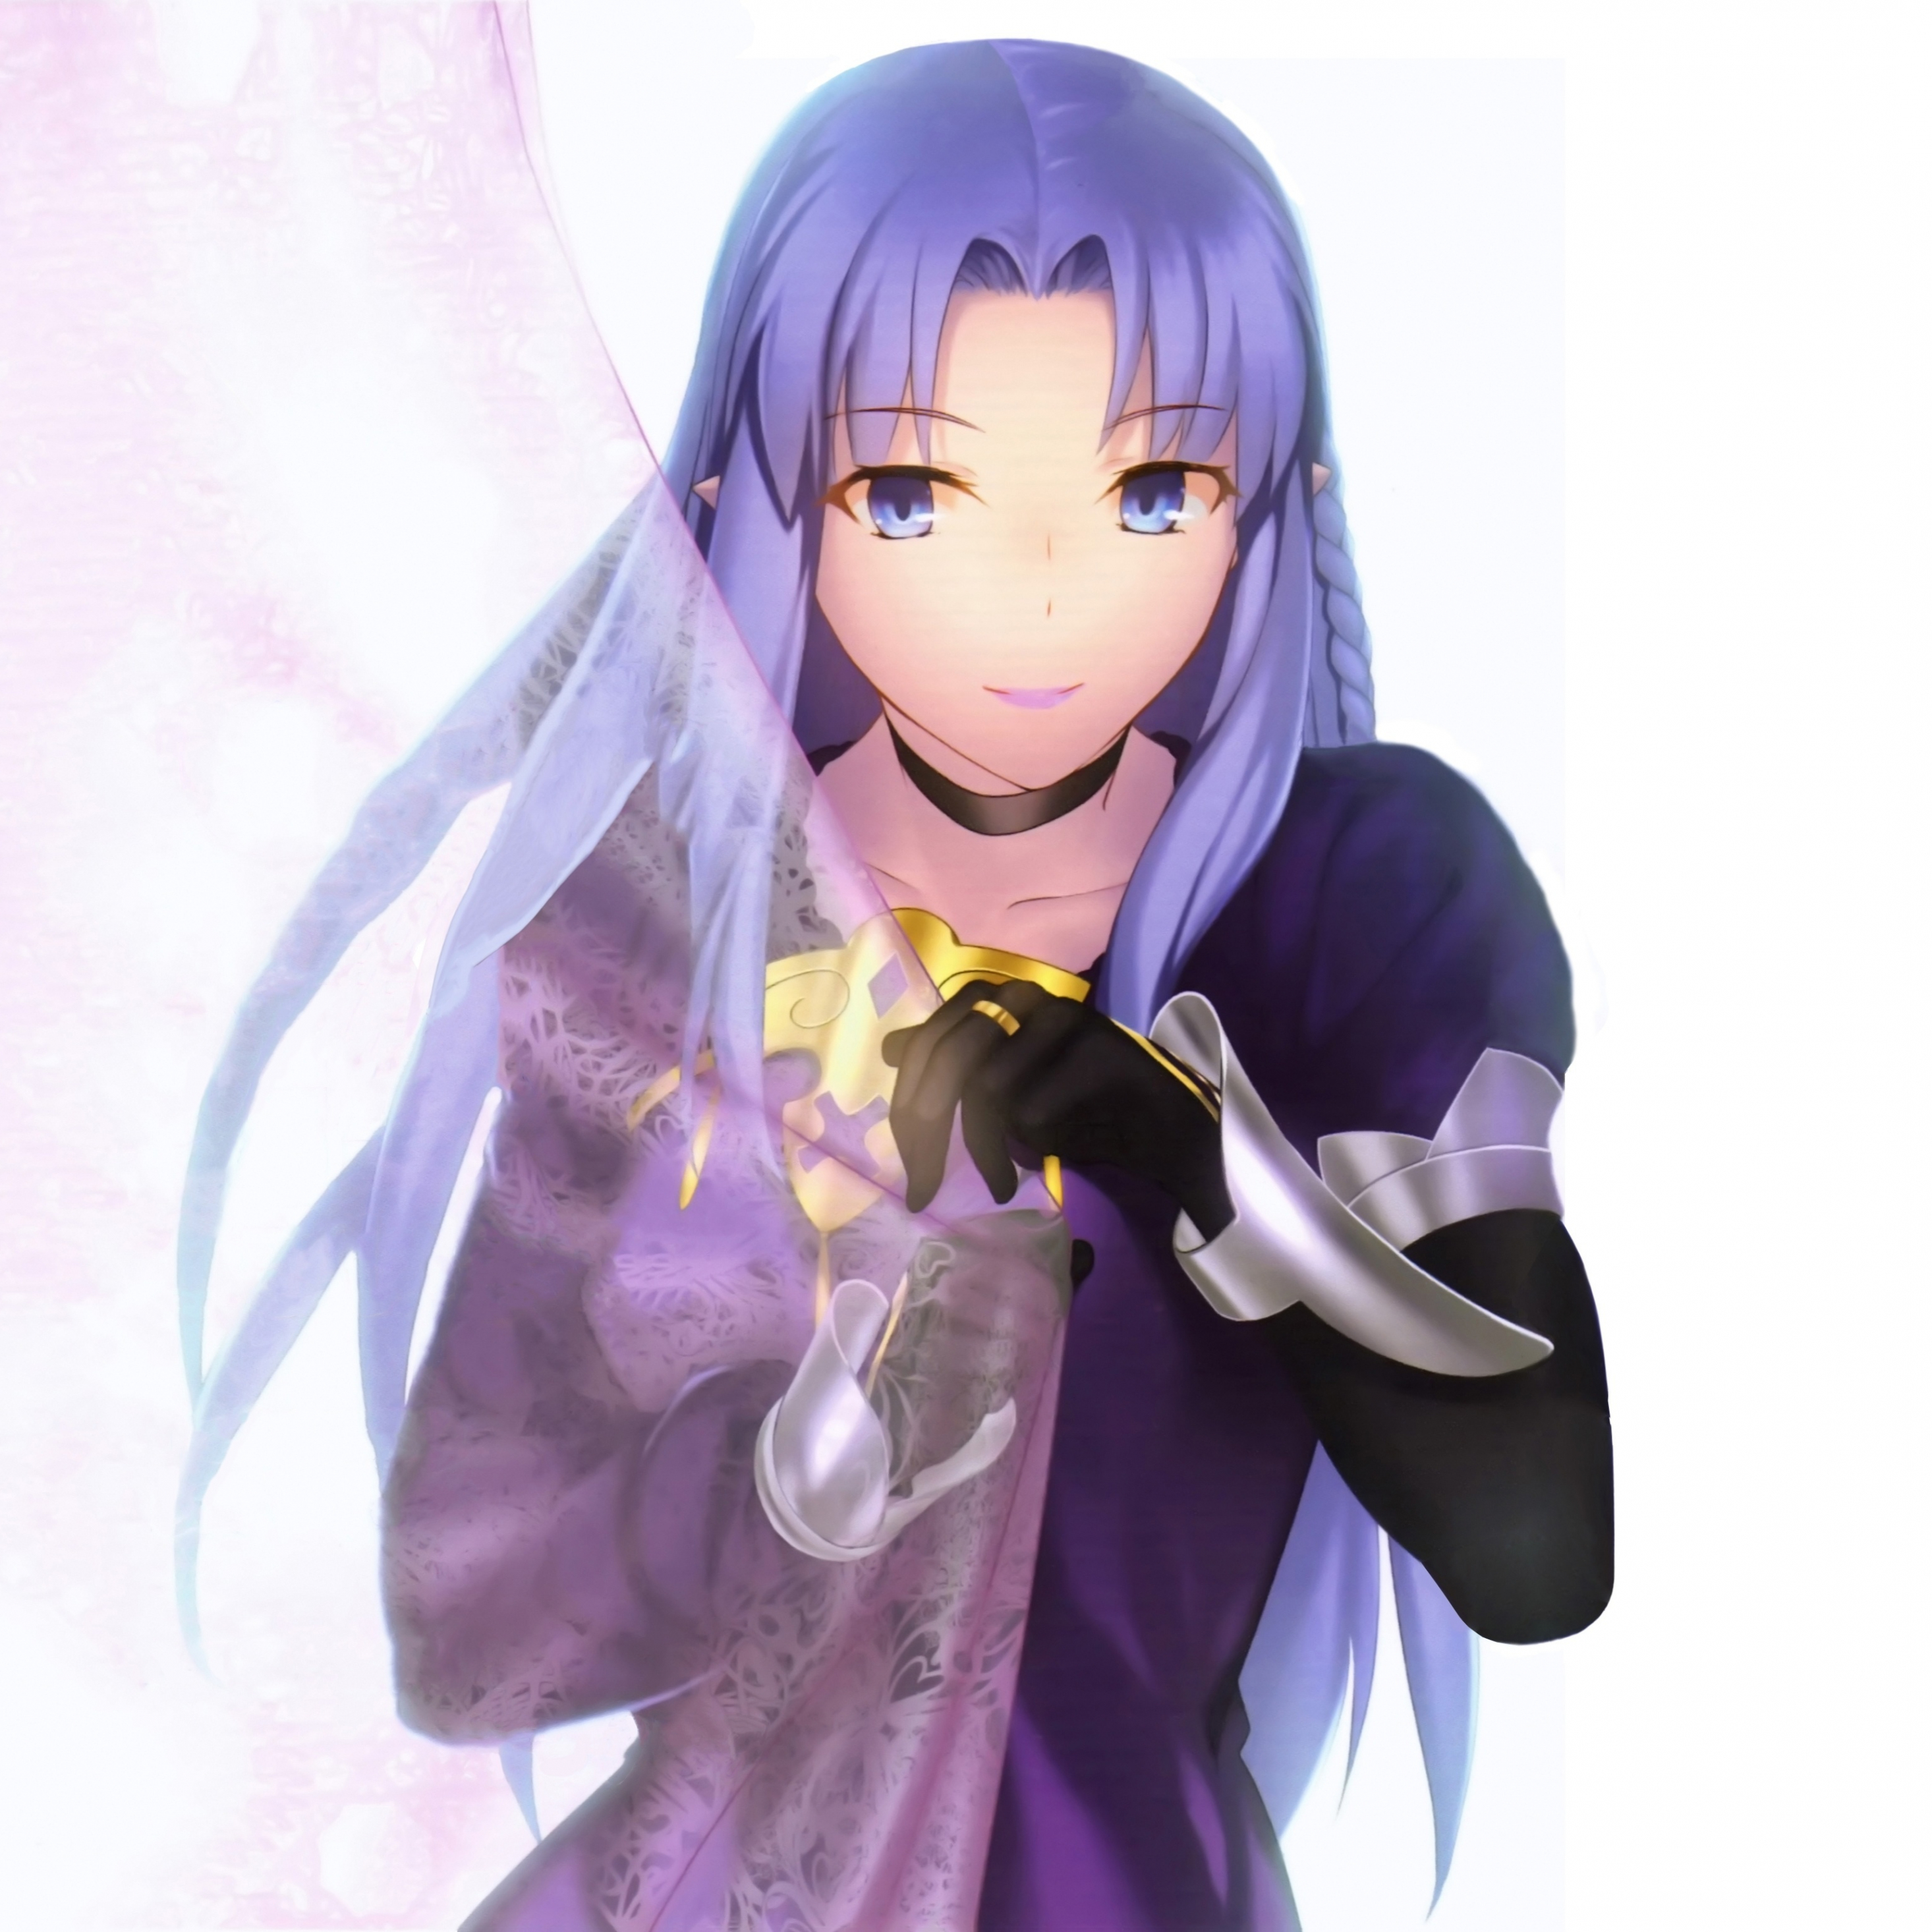 Download Blue Hair Caster Fate Stay Night Anime Girl 2932x2932 Wallpaper Ipad Pro Retina 2932x2932 Image Background 6119